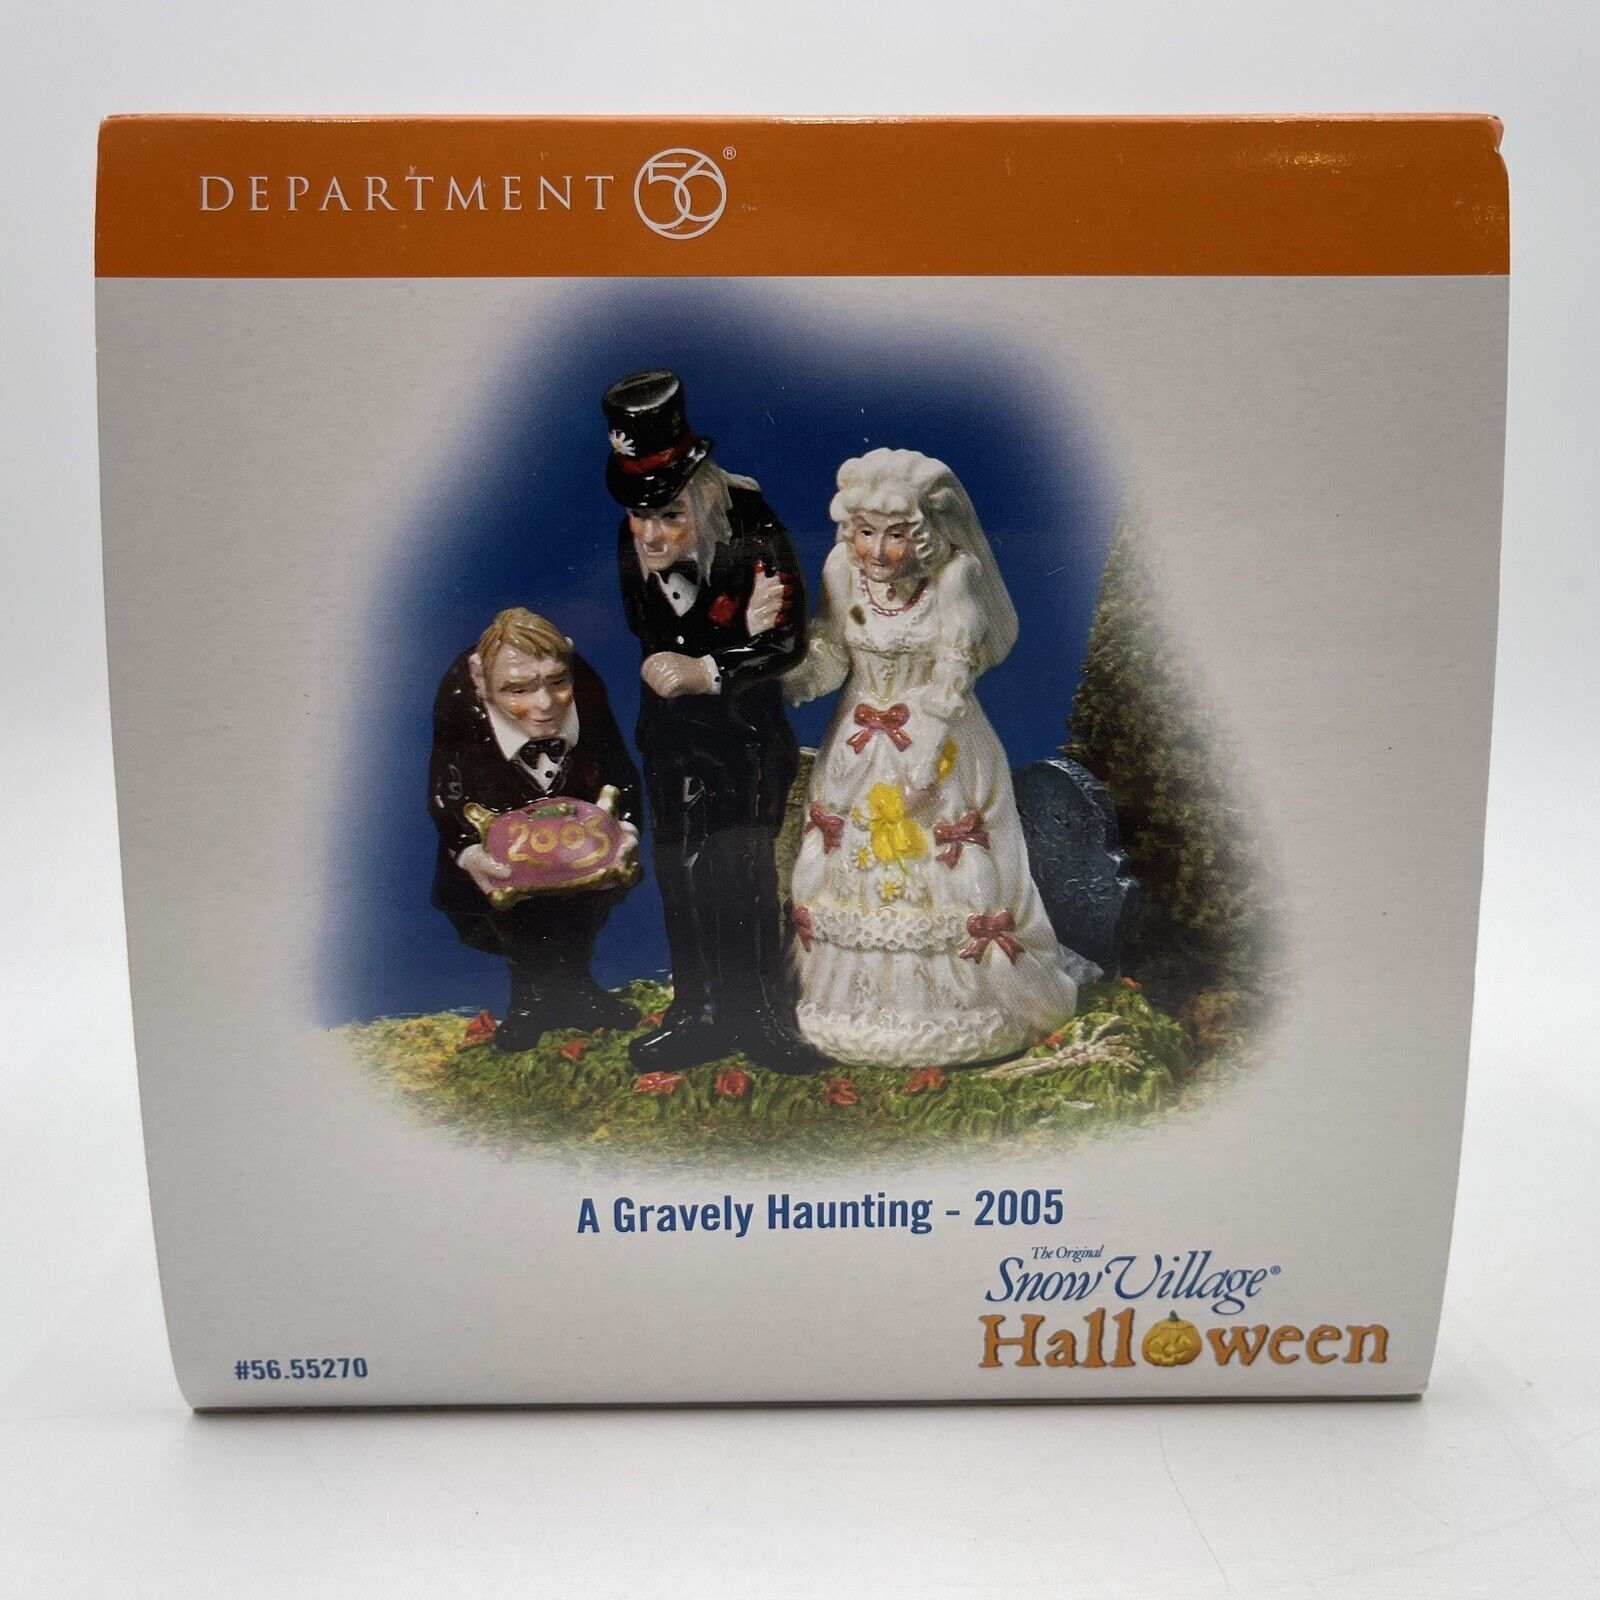 Department 56 A Gravely Haunting 2005 Snow Village Halloween Accessory 55270 New